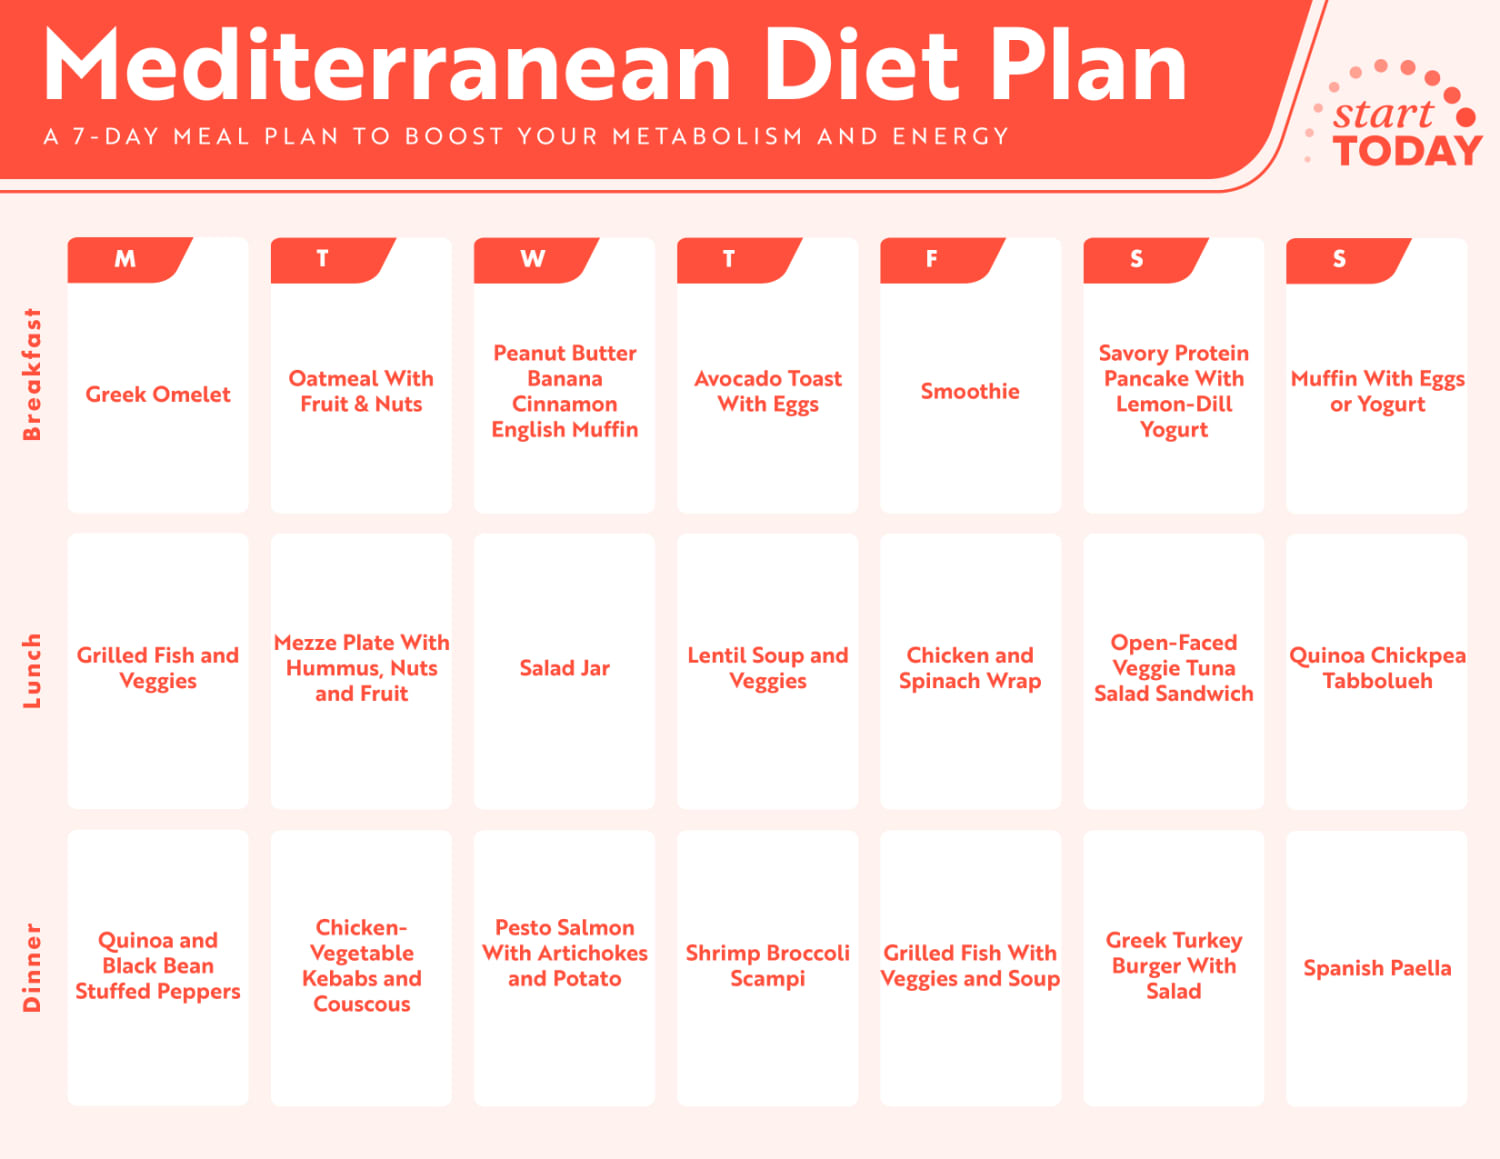 Weight loss meal plans: Tips, 7-day menu, and more